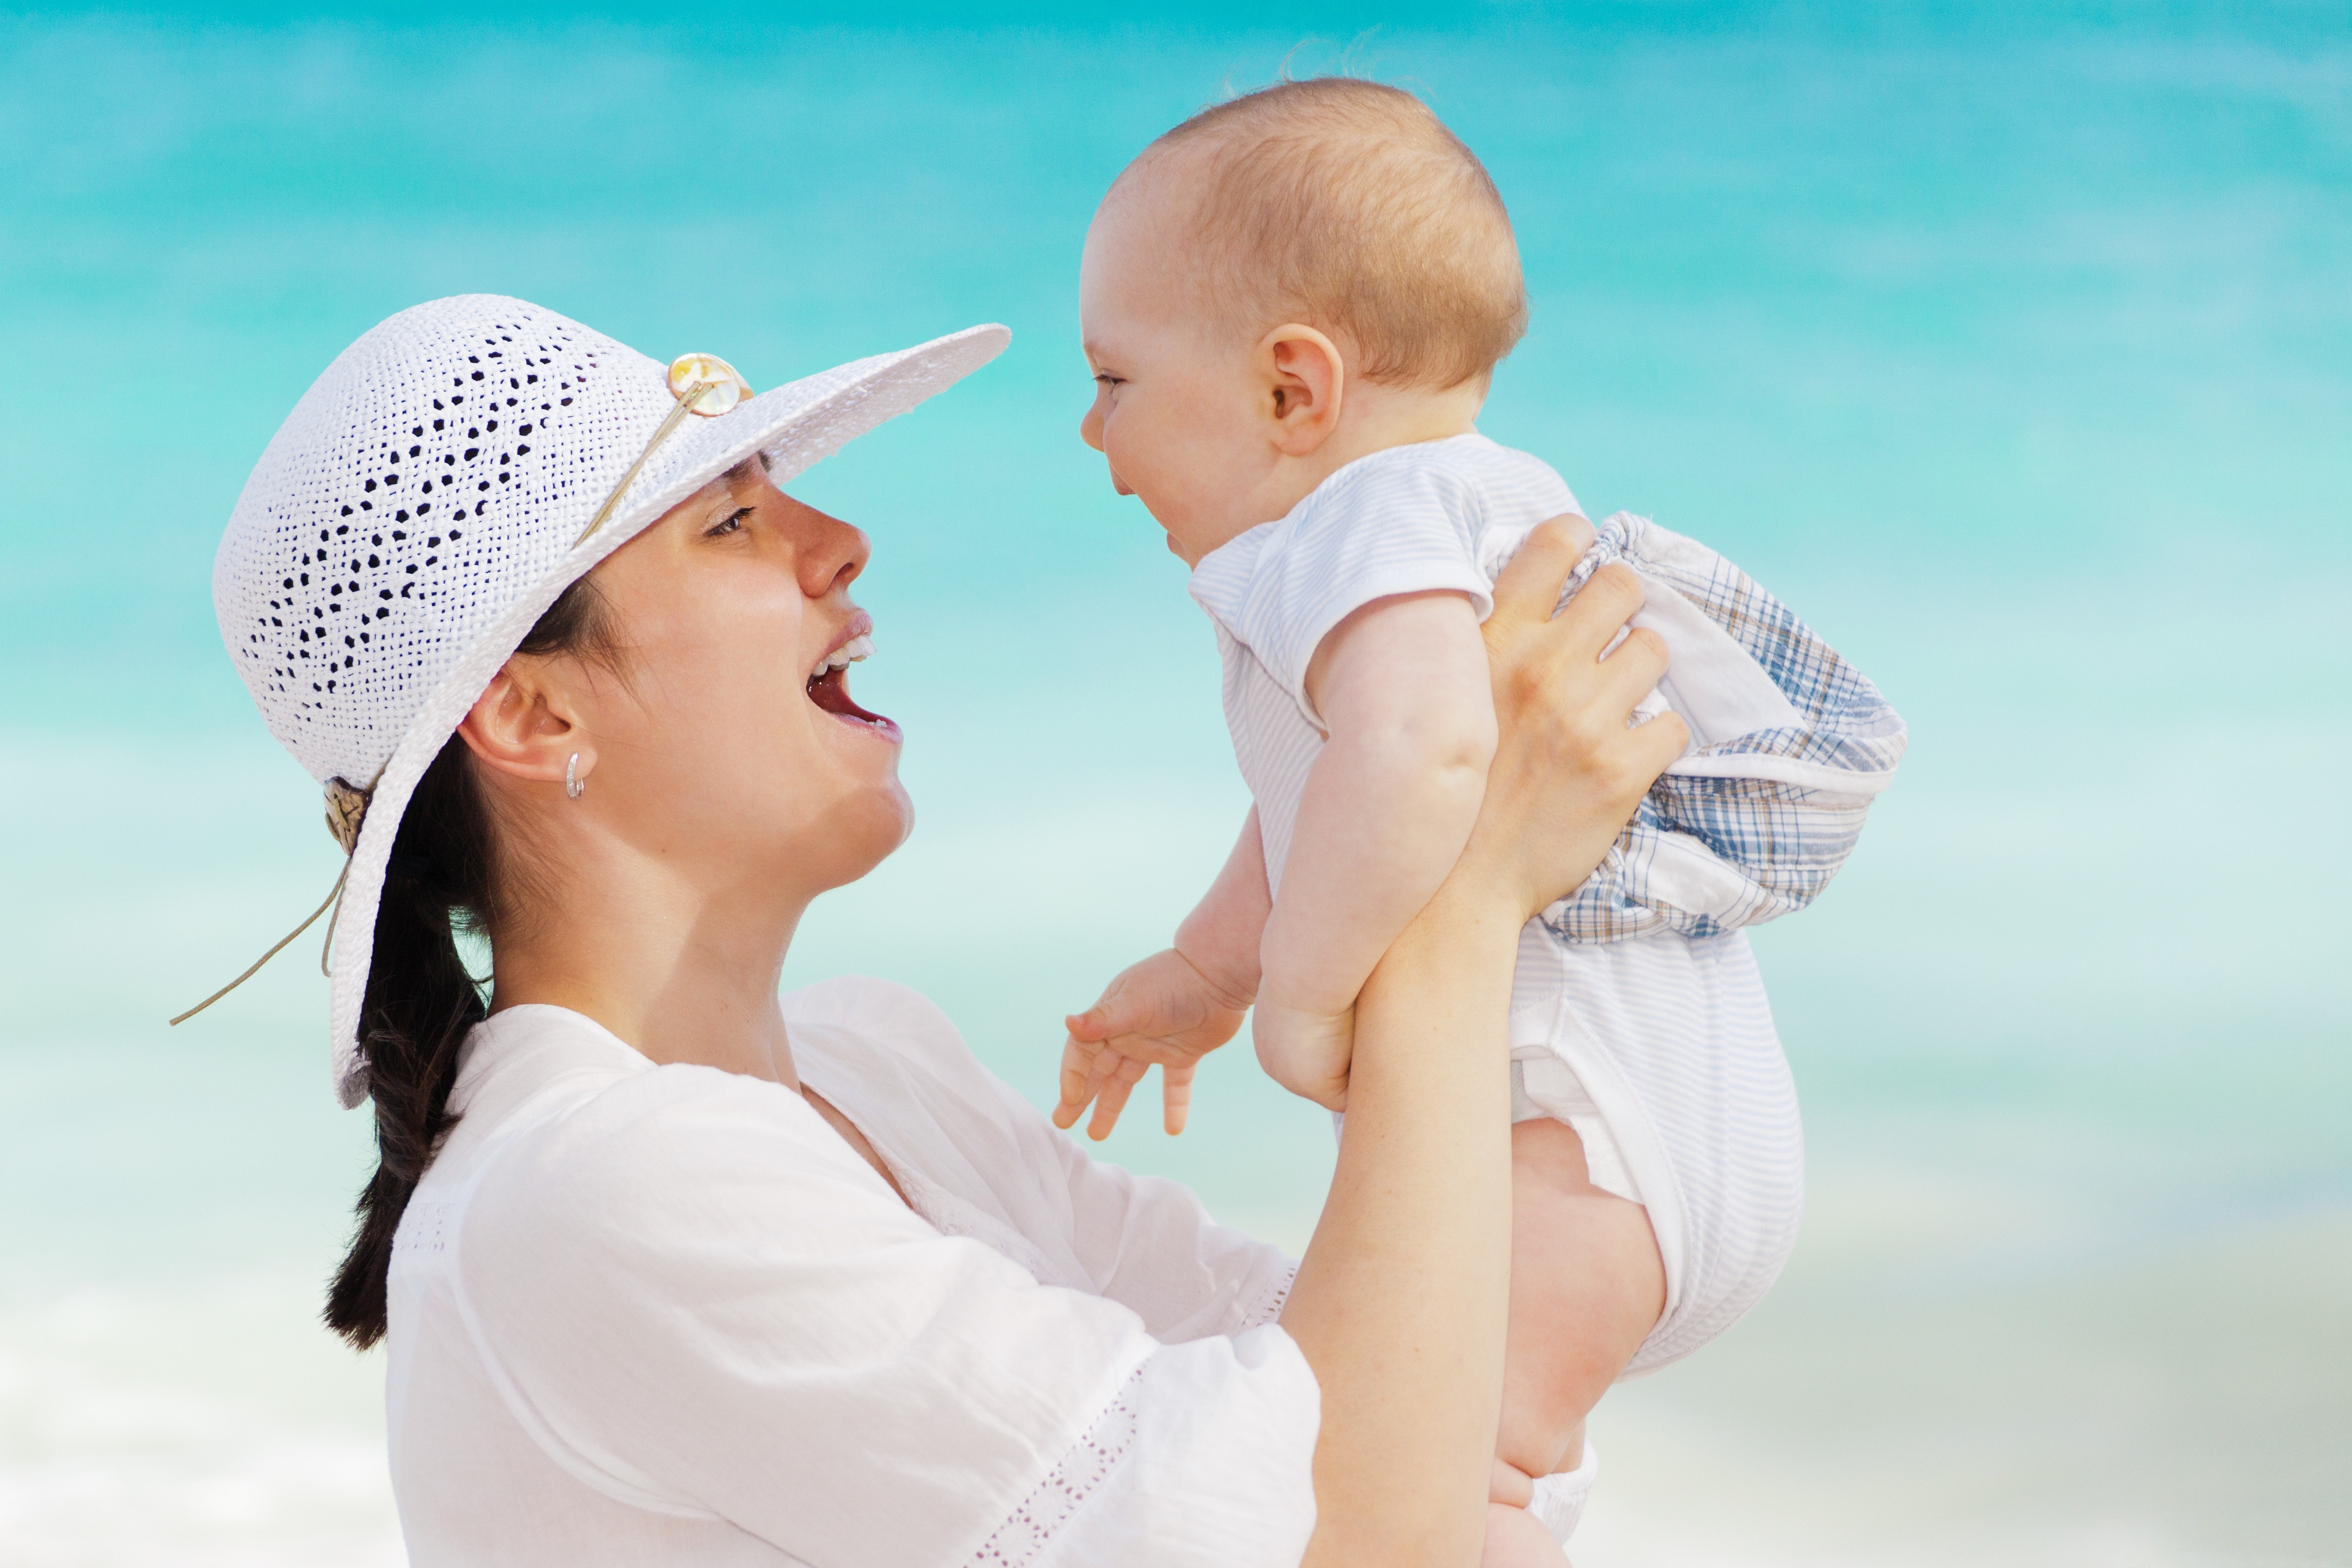 Woman wearing white hat holding baby wearing white onesie near beach during day time photo